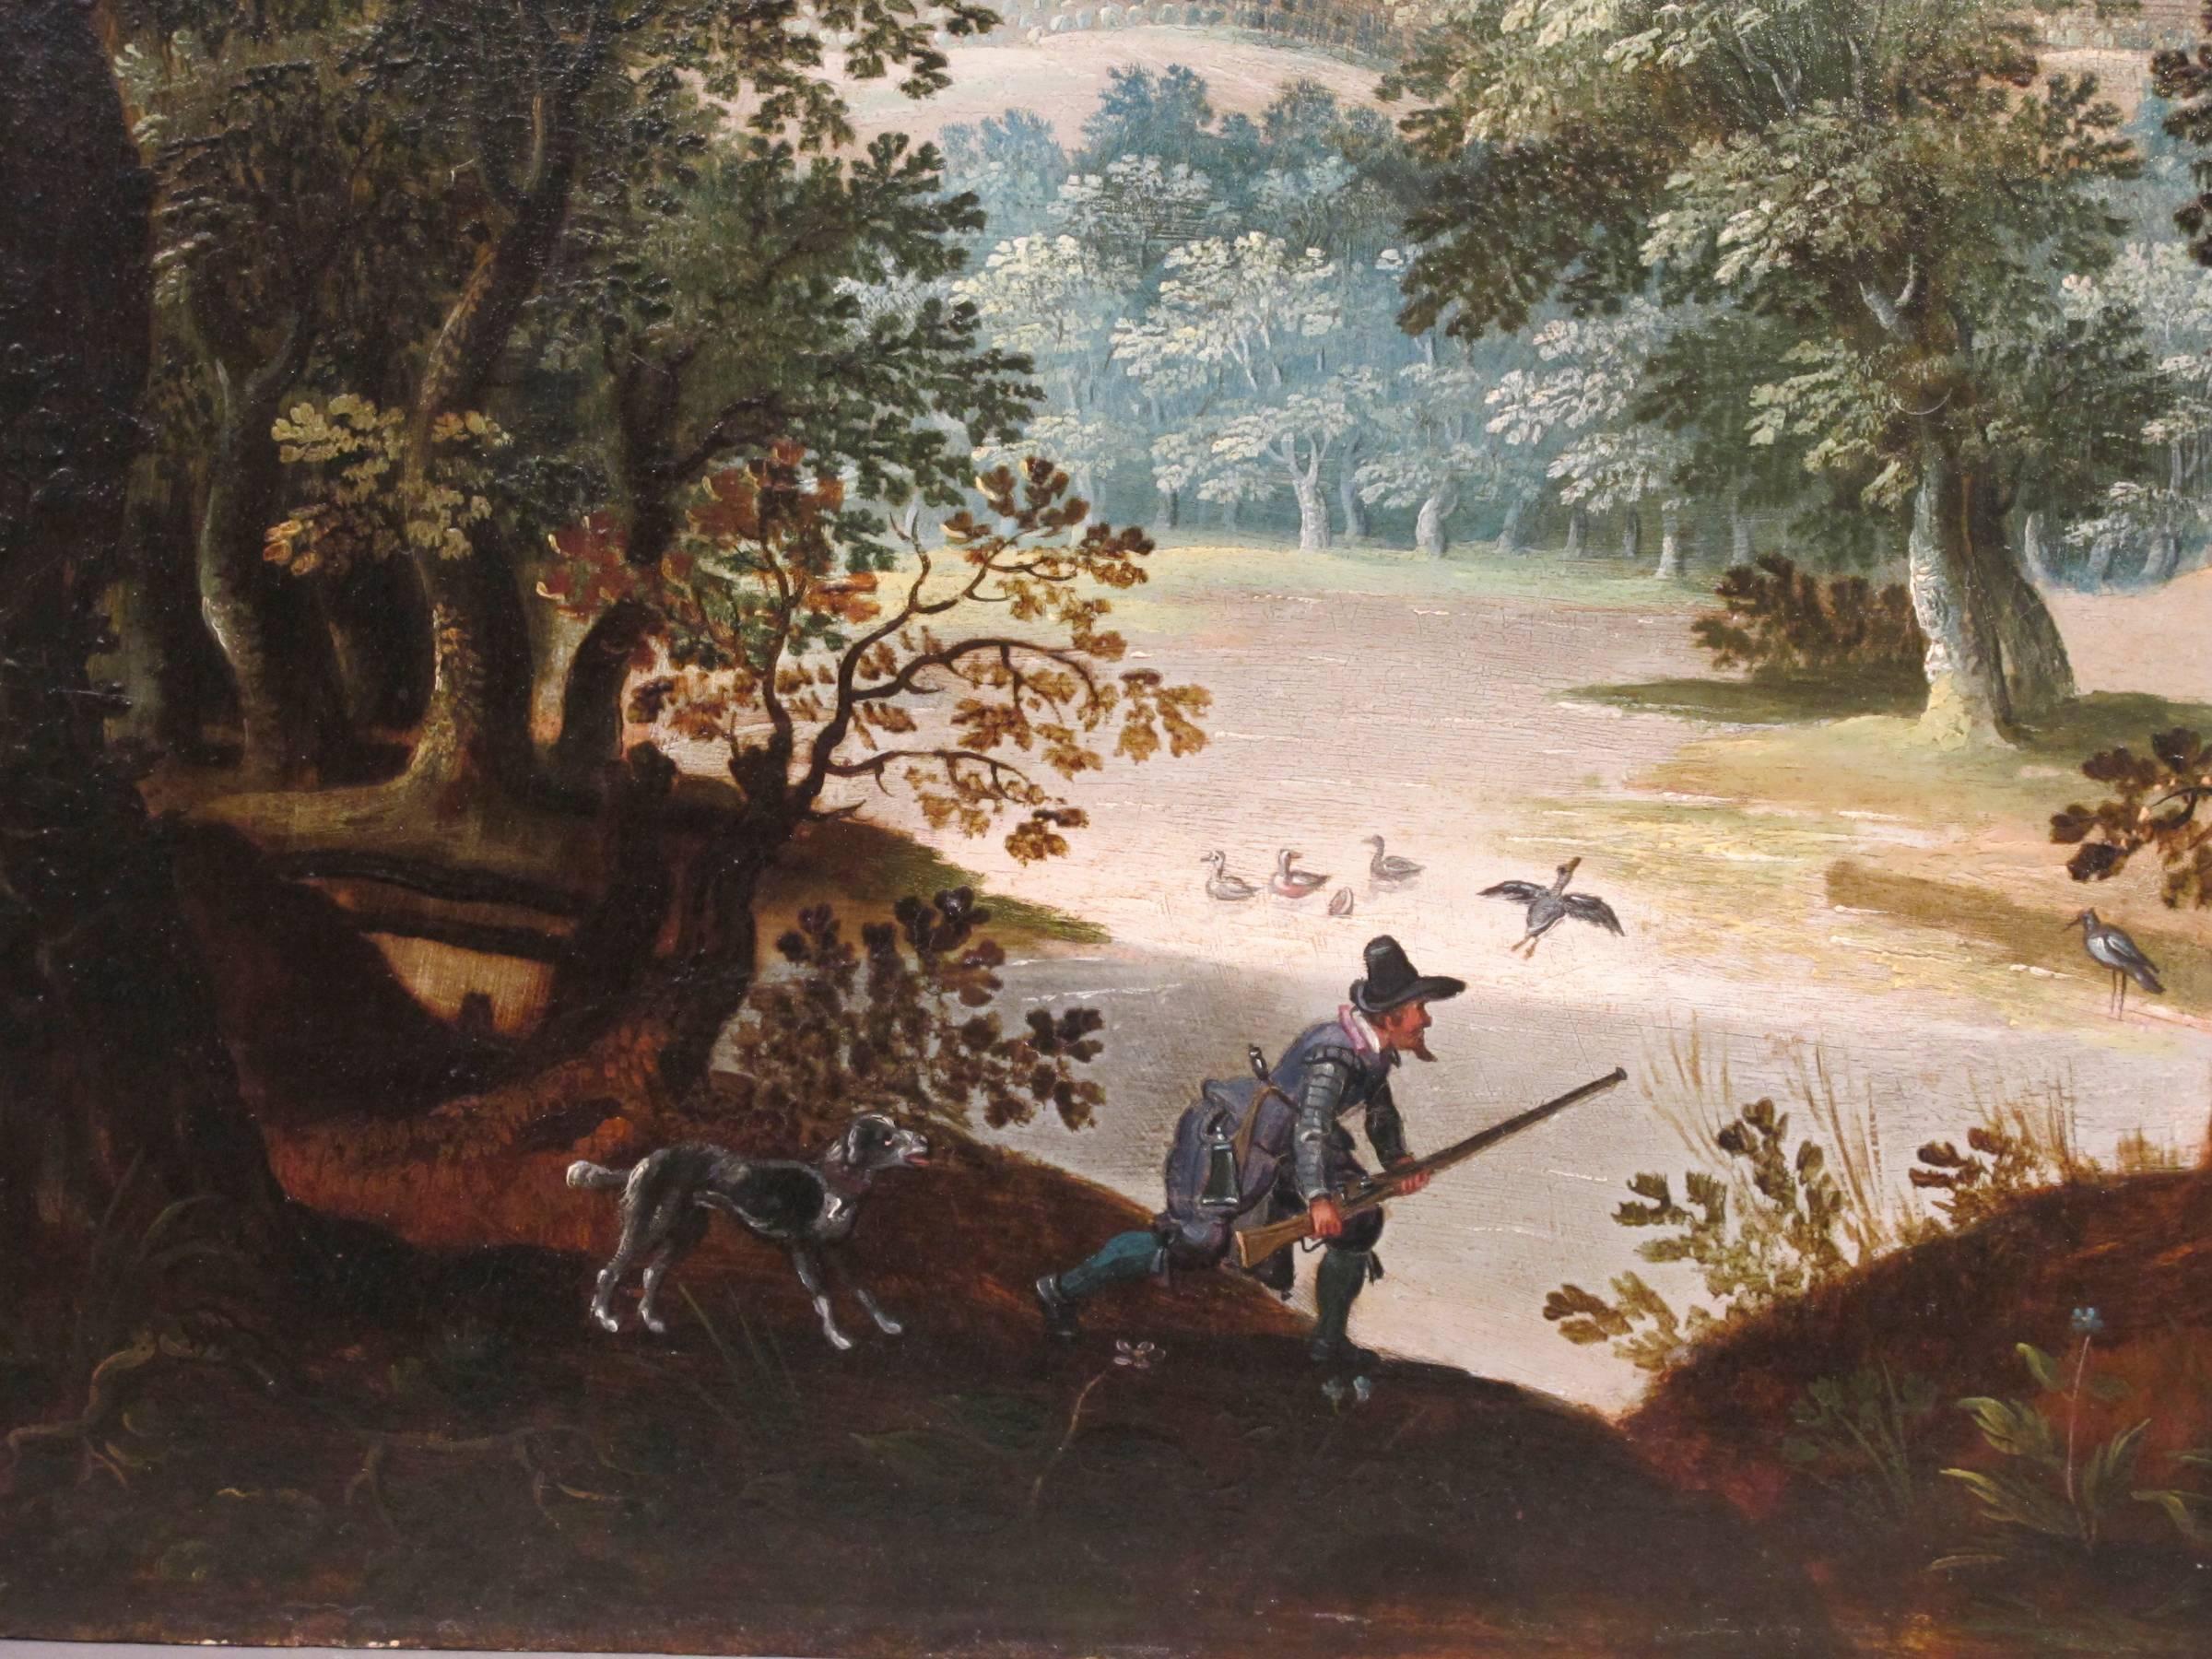 Hunters Shooting Geese
Artist/maker: Attributed to David Vinckboons Origin/country: Flemish, 1576-1632
Medium: Oil on wood panel, a pair Style/form: Landscapes
Dimensions: Height: 19”x Width: 25” – image Height: 27”x Width: 35” - framed in burl wood